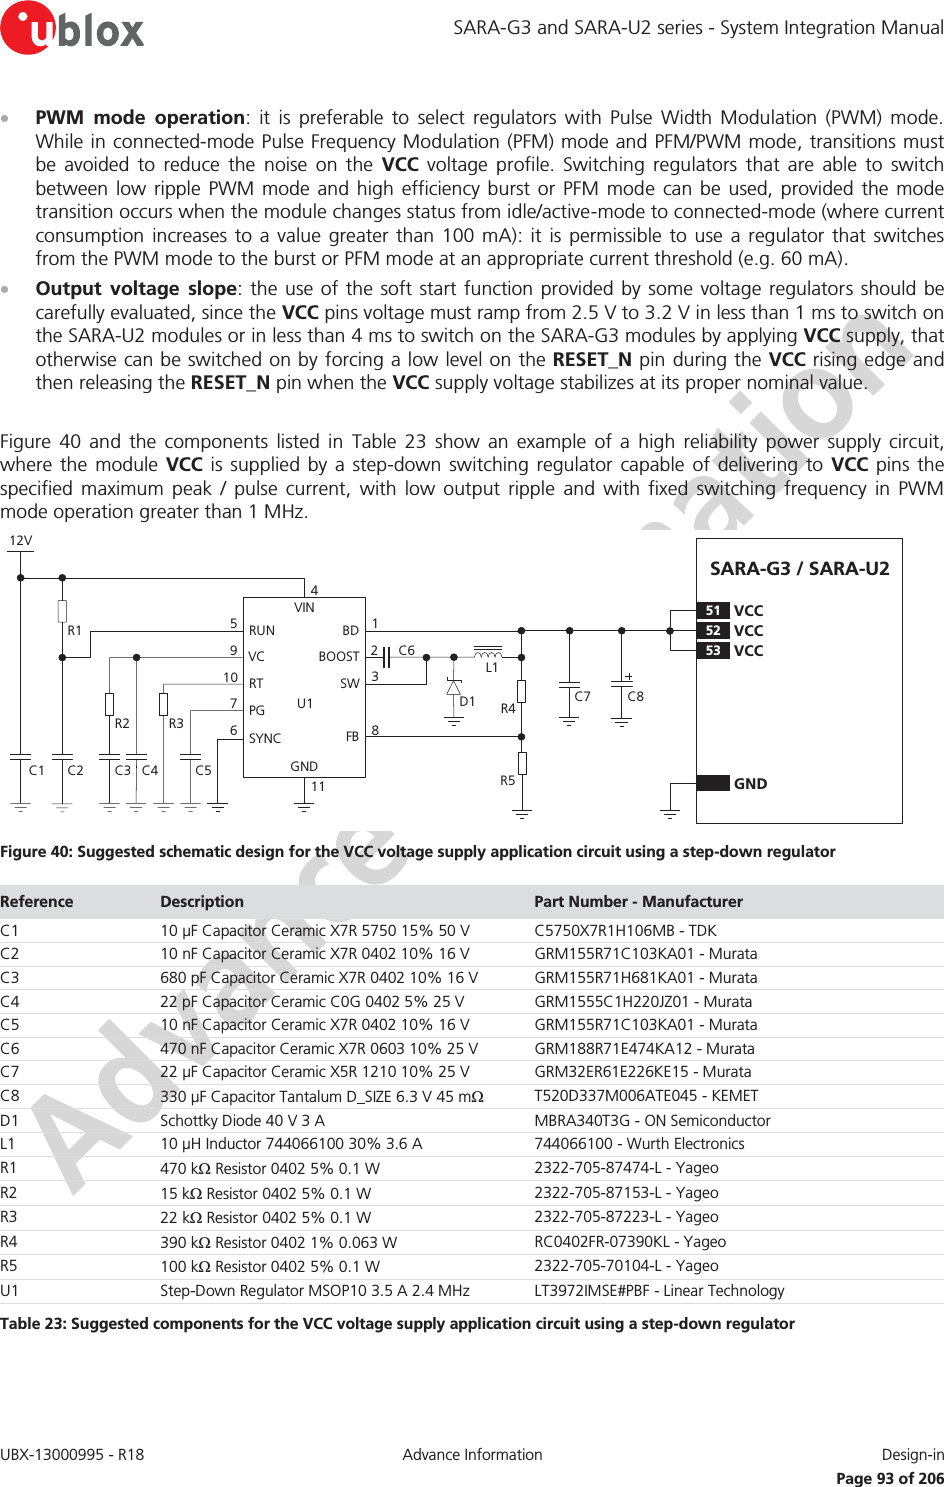 SARA-G3 and SARA-U2 series - System Integration Manual UBX-13000995 - R18  Advance Information  Design-in   Page 93 of 206 x PWM mode operation: it is preferable to select regulators with Pulse Width Modulation (PWM) mode. While in connected-mode Pulse Frequency Modulation (PFM) mode and PFM/PWM mode, transitions must be avoided to reduce the noise on the VCC voltage profile. Switching regulators that are able to switch between low ripple PWM mode and high efficiency burst or PFM mode can be used, provided the mode transition occurs when the module changes status from idle/active-mode to connected-mode (where current consumption increases to a value greater than 100 mA): it is permissible to use a regulator that switches from the PWM mode to the burst or PFM mode at an appropriate current threshold (e.g. 60 mA). x Output voltage slope: the use of the soft start function provided by some voltage regulators should be carefully evaluated, since the VCC pins voltage must ramp from 2.5 V to 3.2 V in less than 1 ms to switch on the SARA-U2 modules or in less than 4 ms to switch on the SARA-G3 modules by applying VCC supply, that otherwise can be switched on by forcing a low level on the RESET_N pin during the VCC rising edge and then releasing the RESET_N pin when the VCC supply voltage stabilizes at its proper nominal value.  Figure 40 and the components listed in Table 23 show an example of a high reliability power supply circuit, where the module VCC is supplied by a step-down switching regulator capable of delivering to VCC pins the specified maximum peak / pulse current, with low output ripple and with fixed switching frequency in PWM mode operation greater than 1 MHz. SARA-G3 / SARA-U212VC5R3C4R2C2C1R1VINRUNVCRTPGSYNCBDBOOSTSWFBGND671095C61238114C7 C8D1 R4R5L1C3U152 VCC53 VCC51 VCCGND Figure 40: Suggested schematic design for the VCC voltage supply application circuit using a step-down regulator Reference  Description  Part Number - Manufacturer C1 10 μF Capacitor Ceramic X7R 5750 15% 50 V C5750X7R1H106MB - TDK C2 10 nF Capacitor Ceramic X7R 0402 10% 16 V GRM155R71C103KA01 - Murata C3 680 pF Capacitor Ceramic X7R 0402 10% 16 V GRM155R71H681KA01 - Murata C4 22 pF Capacitor Ceramic C0G 0402 5% 25 V GRM1555C1H220JZ01 - Murata C5 10 nF Capacitor Ceramic X7R 0402 10% 16 V GRM155R71C103KA01 - Murata C6 470 nF Capacitor Ceramic X7R 0603 10% 25 V GRM188R71E474KA12 - Murata C7 22 μF Capacitor Ceramic X5R 1210 10% 25 V GRM32ER61E226KE15 - Murata C8 330 μF Capacitor Tantalum D_SIZE 6.3 V 45 m: T520D337M006ATE045 - KEMET D1 Schottky Diode 40 V 3 A MBRA340T3G - ON Semiconductor L1 10 μH Inductor 744066100 30% 3.6 A 744066100 - Wurth Electronics R1 470 k: Resistor 0402 5% 0.1 W 2322-705-87474-L - Yageo R2 15 k: Resistor 0402 5% 0.1 W 2322-705-87153-L - Yageo R3 22 k: Resistor 0402 5% 0.1 W 2322-705-87223-L - Yageo R4 390 k: Resistor 0402 1% 0.063 W RC0402FR-07390KL - Yageo R5 100 k: Resistor 0402 5% 0.1 W 2322-705-70104-L - Yageo U1 Step-Down Regulator MSOP10 3.5 A 2.4 MHz LT3972IMSE#PBF - Linear Technology Table 23: Suggested components for the VCC voltage supply application circuit using a step-down regulator  